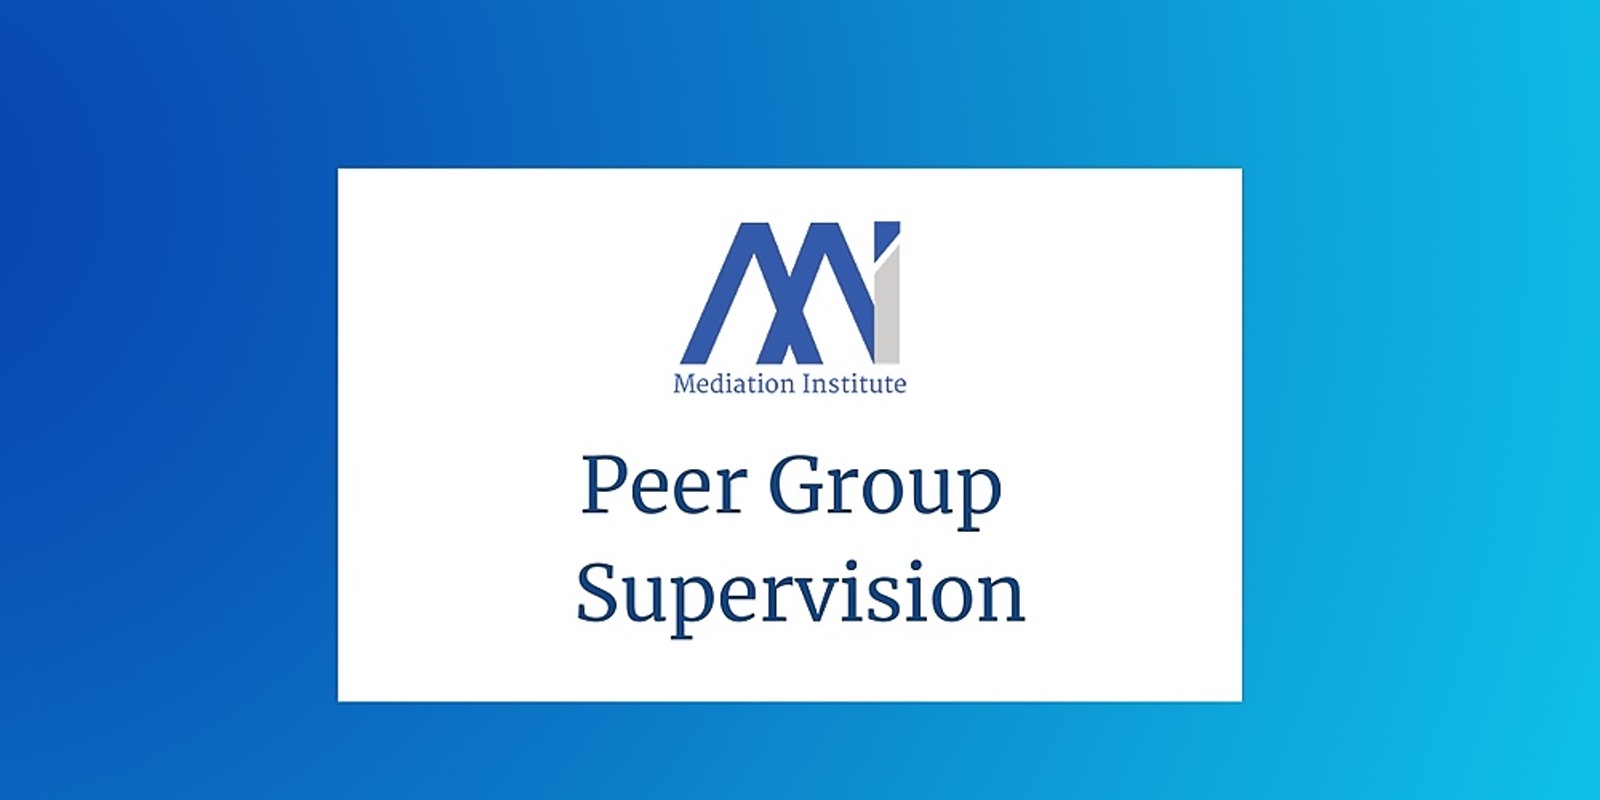 Banner image for Mi Peer Group Supervision